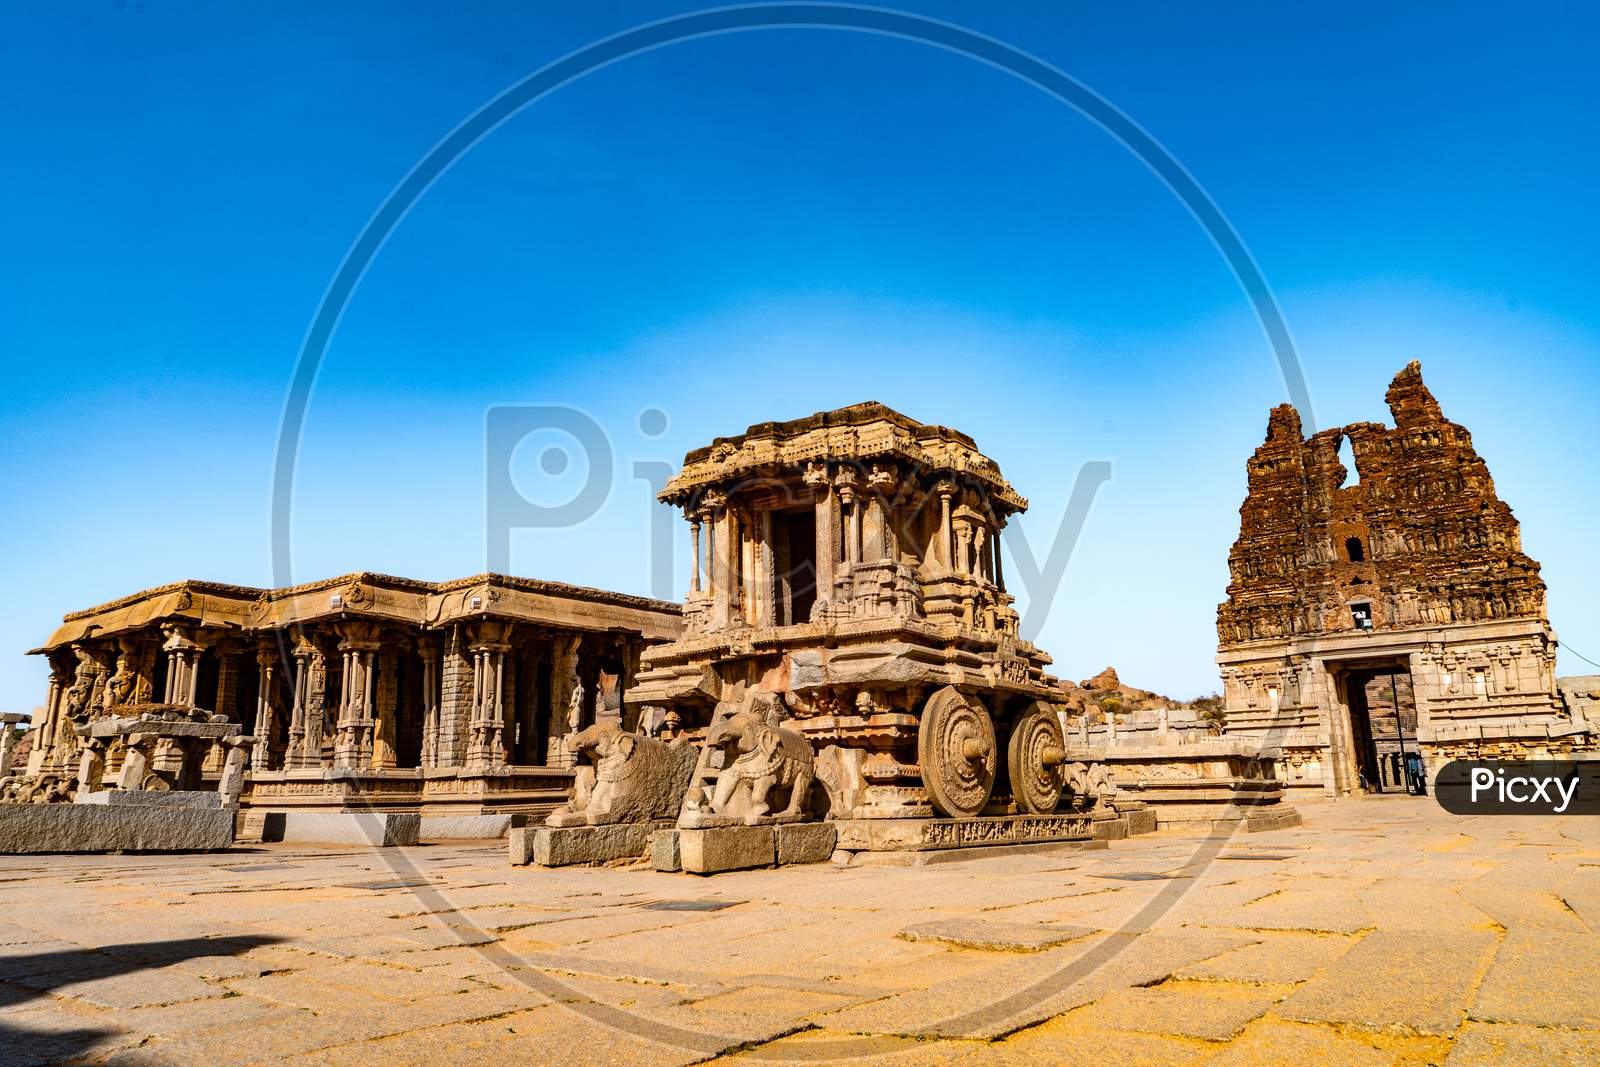 The Vitthala temple has a Garuda shrine in the form of a stone chariot in the courtyard; it is an often-pictured symbol of Hampi.